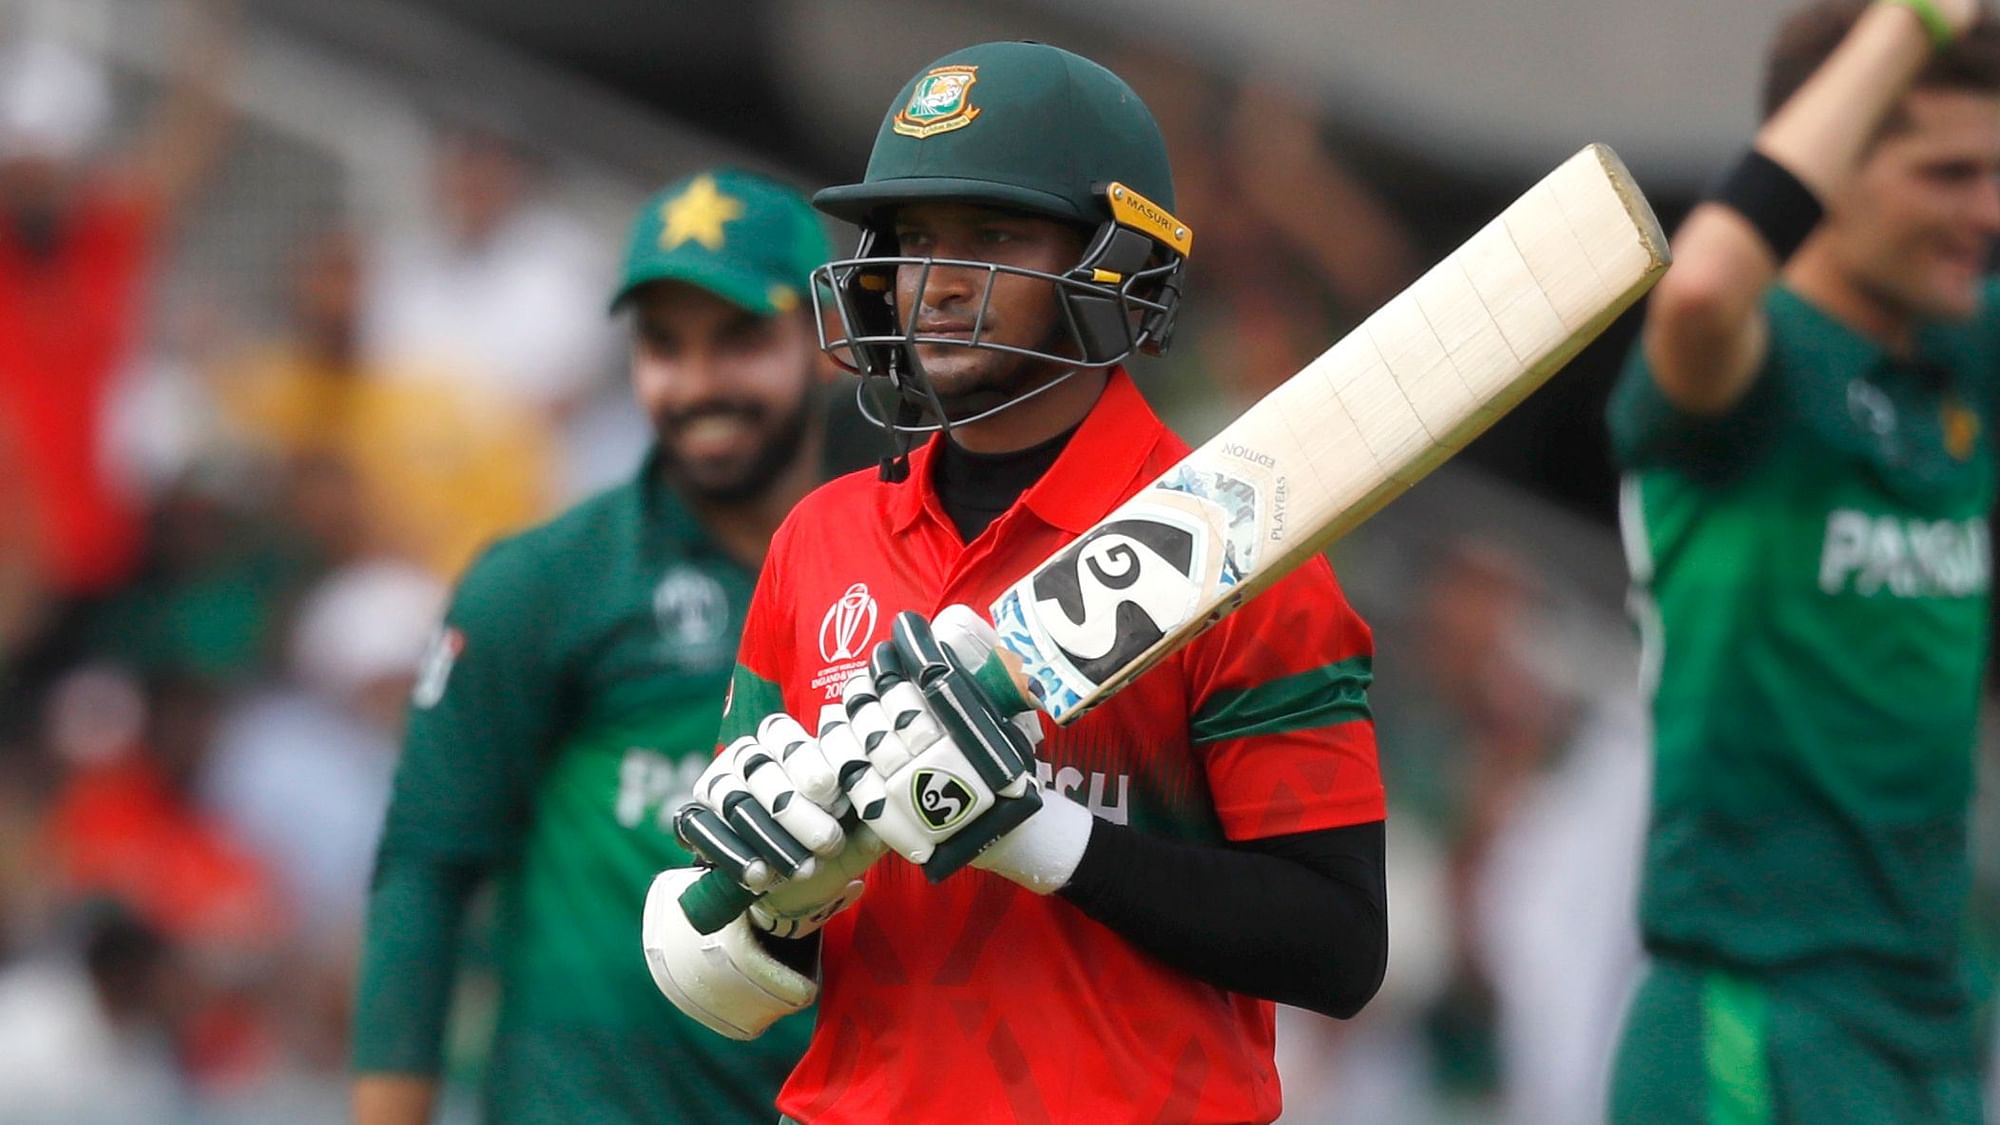 Bangladesh captain Shakib Al Hasan has been banned for two years (one of those suspended), for failing to report corrupt approaches.